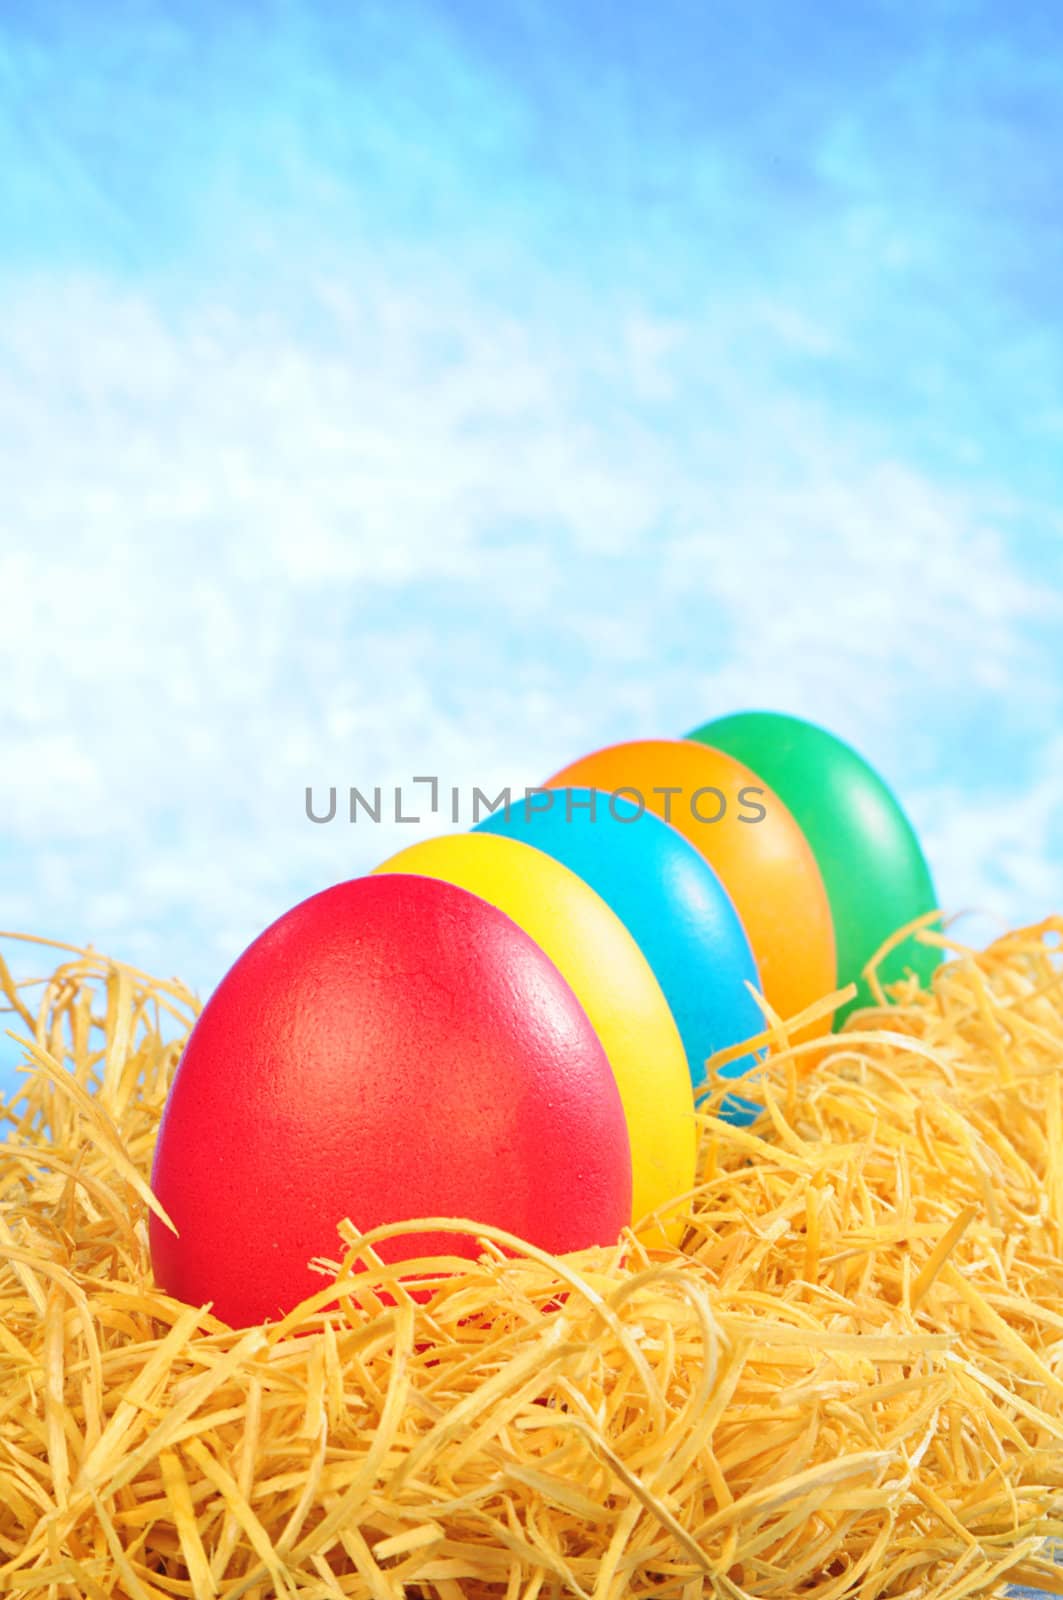 five painted eggs in straw on a sky background by dyoma